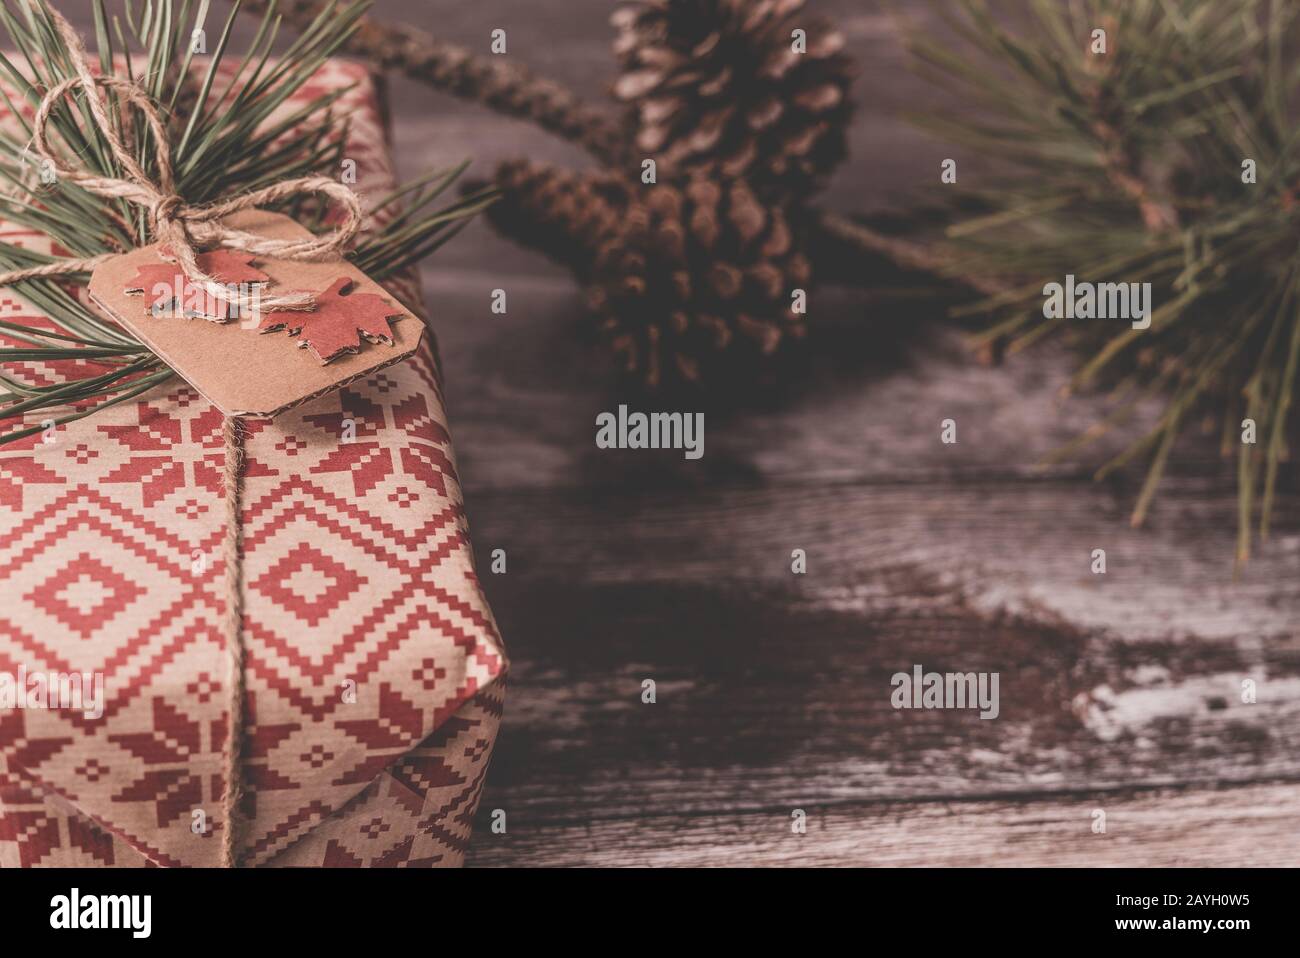 Closeup of a Christmas present with creative handmade decorative rustic diy gift wrapped in red retro wrapping paper with natural vintage twine Stock Photo